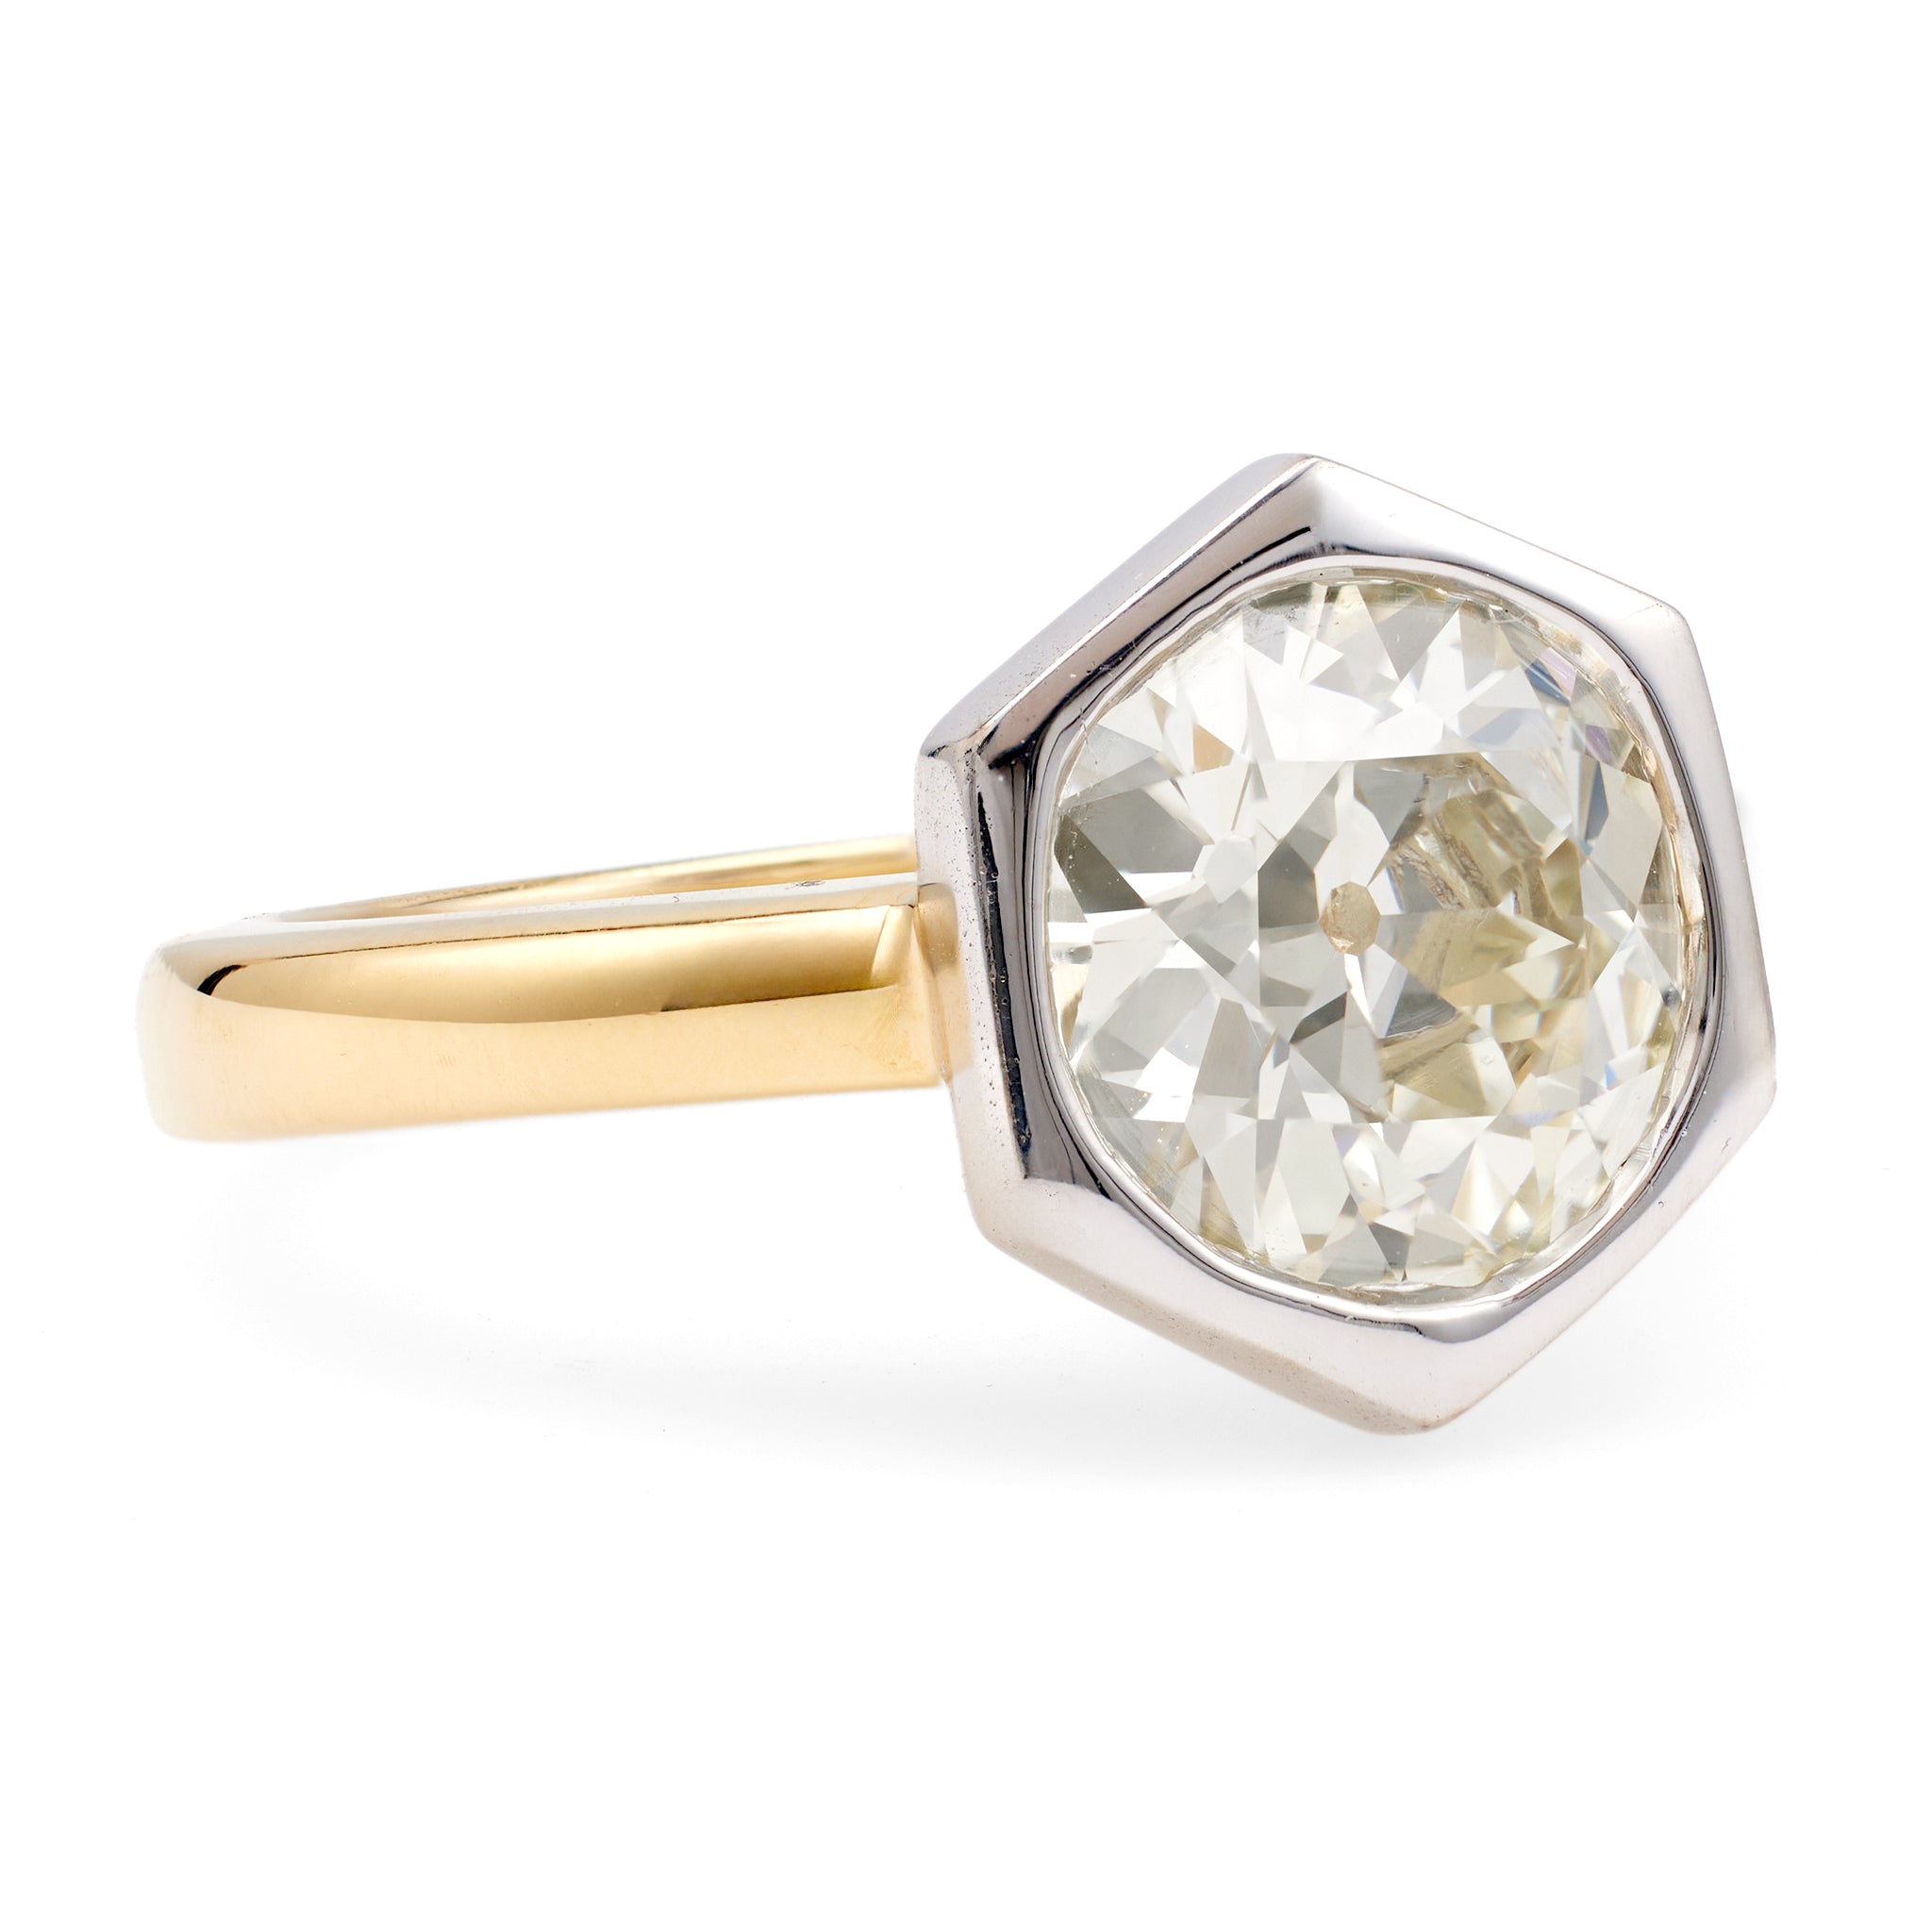 French GIA 3.21 Carat Old European Cut Diamond 18k Gold Solitaire Ring Rings Jack Weir & Sons   